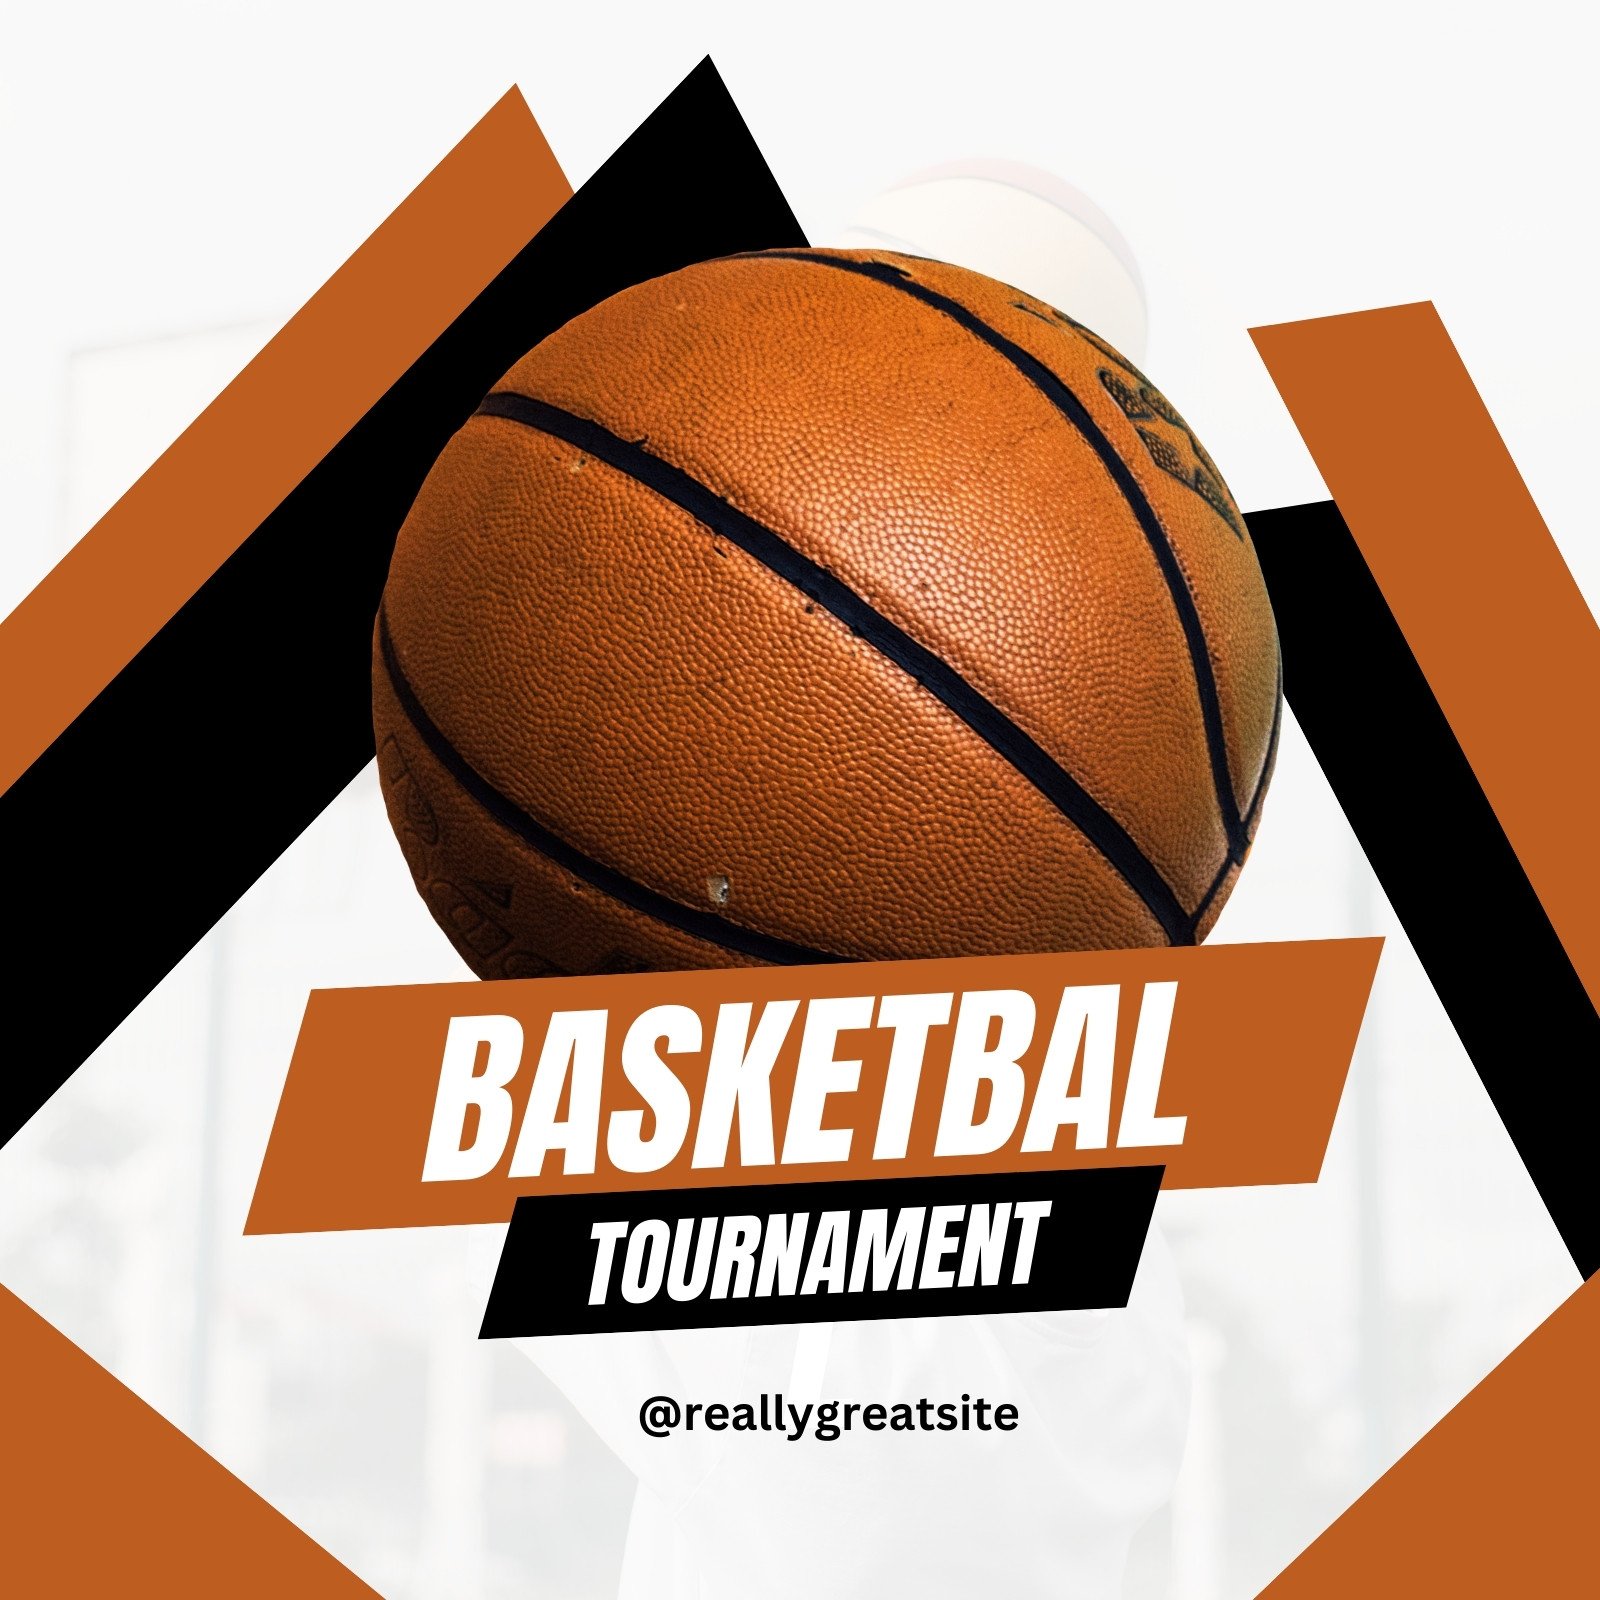 Page 4 - Free and customizable basketball templates